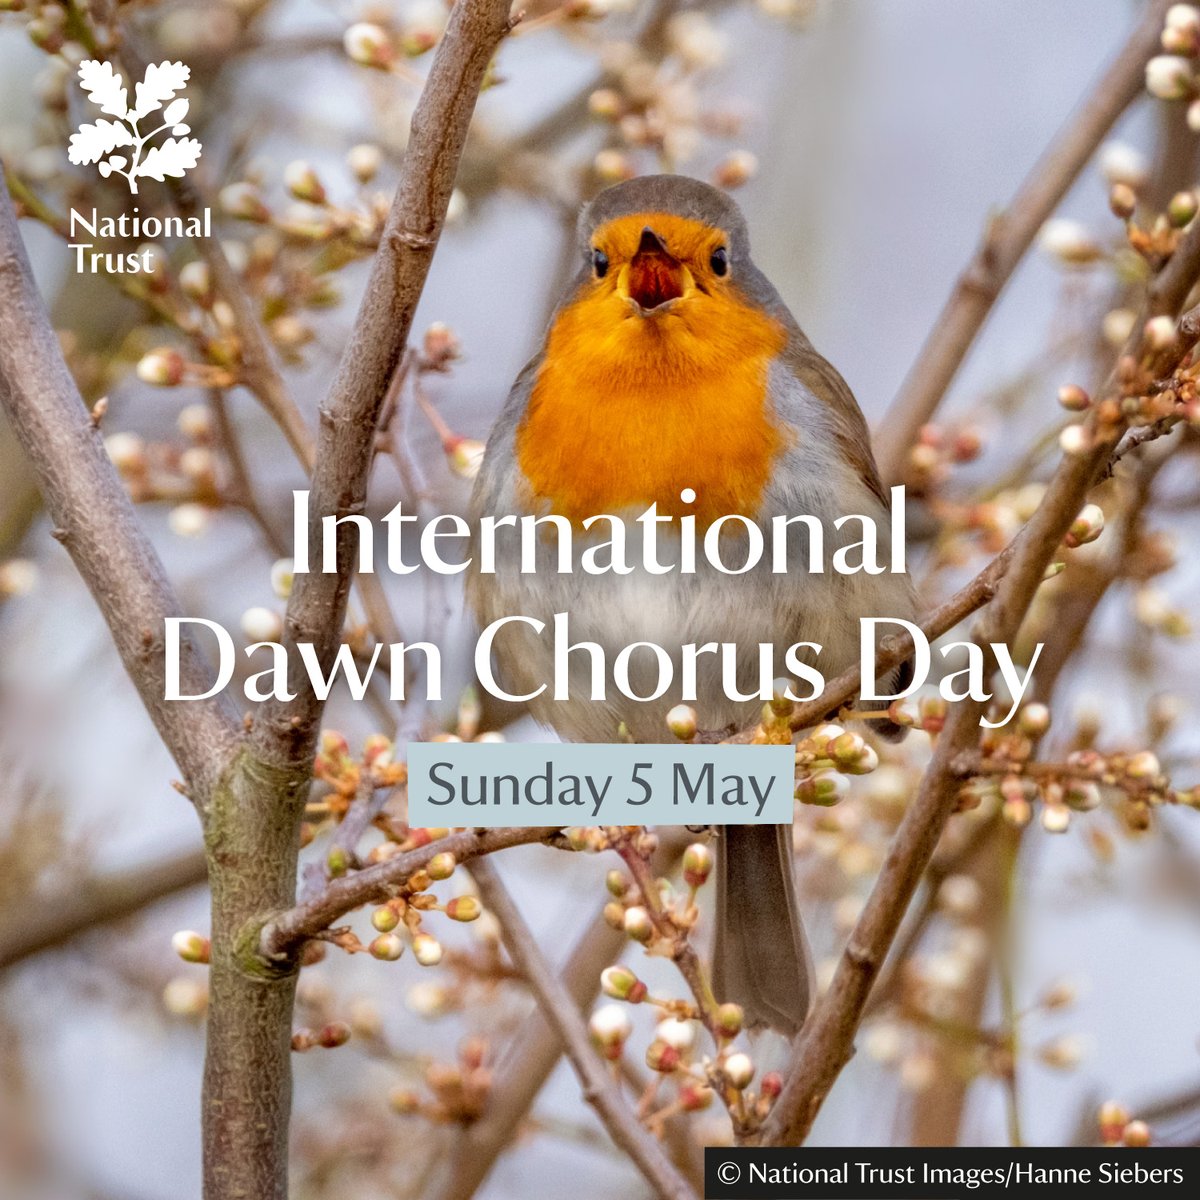 What will you hear this #InternationalDawnChorusDay? At Newtown, the creeks & woodlands fill with bird song as the sun rises & you might even be lucky enough to hear a nightingale. Over open grassland, such as on Tennyson, Mottistone & Culver Downs, skylarks will be singing.